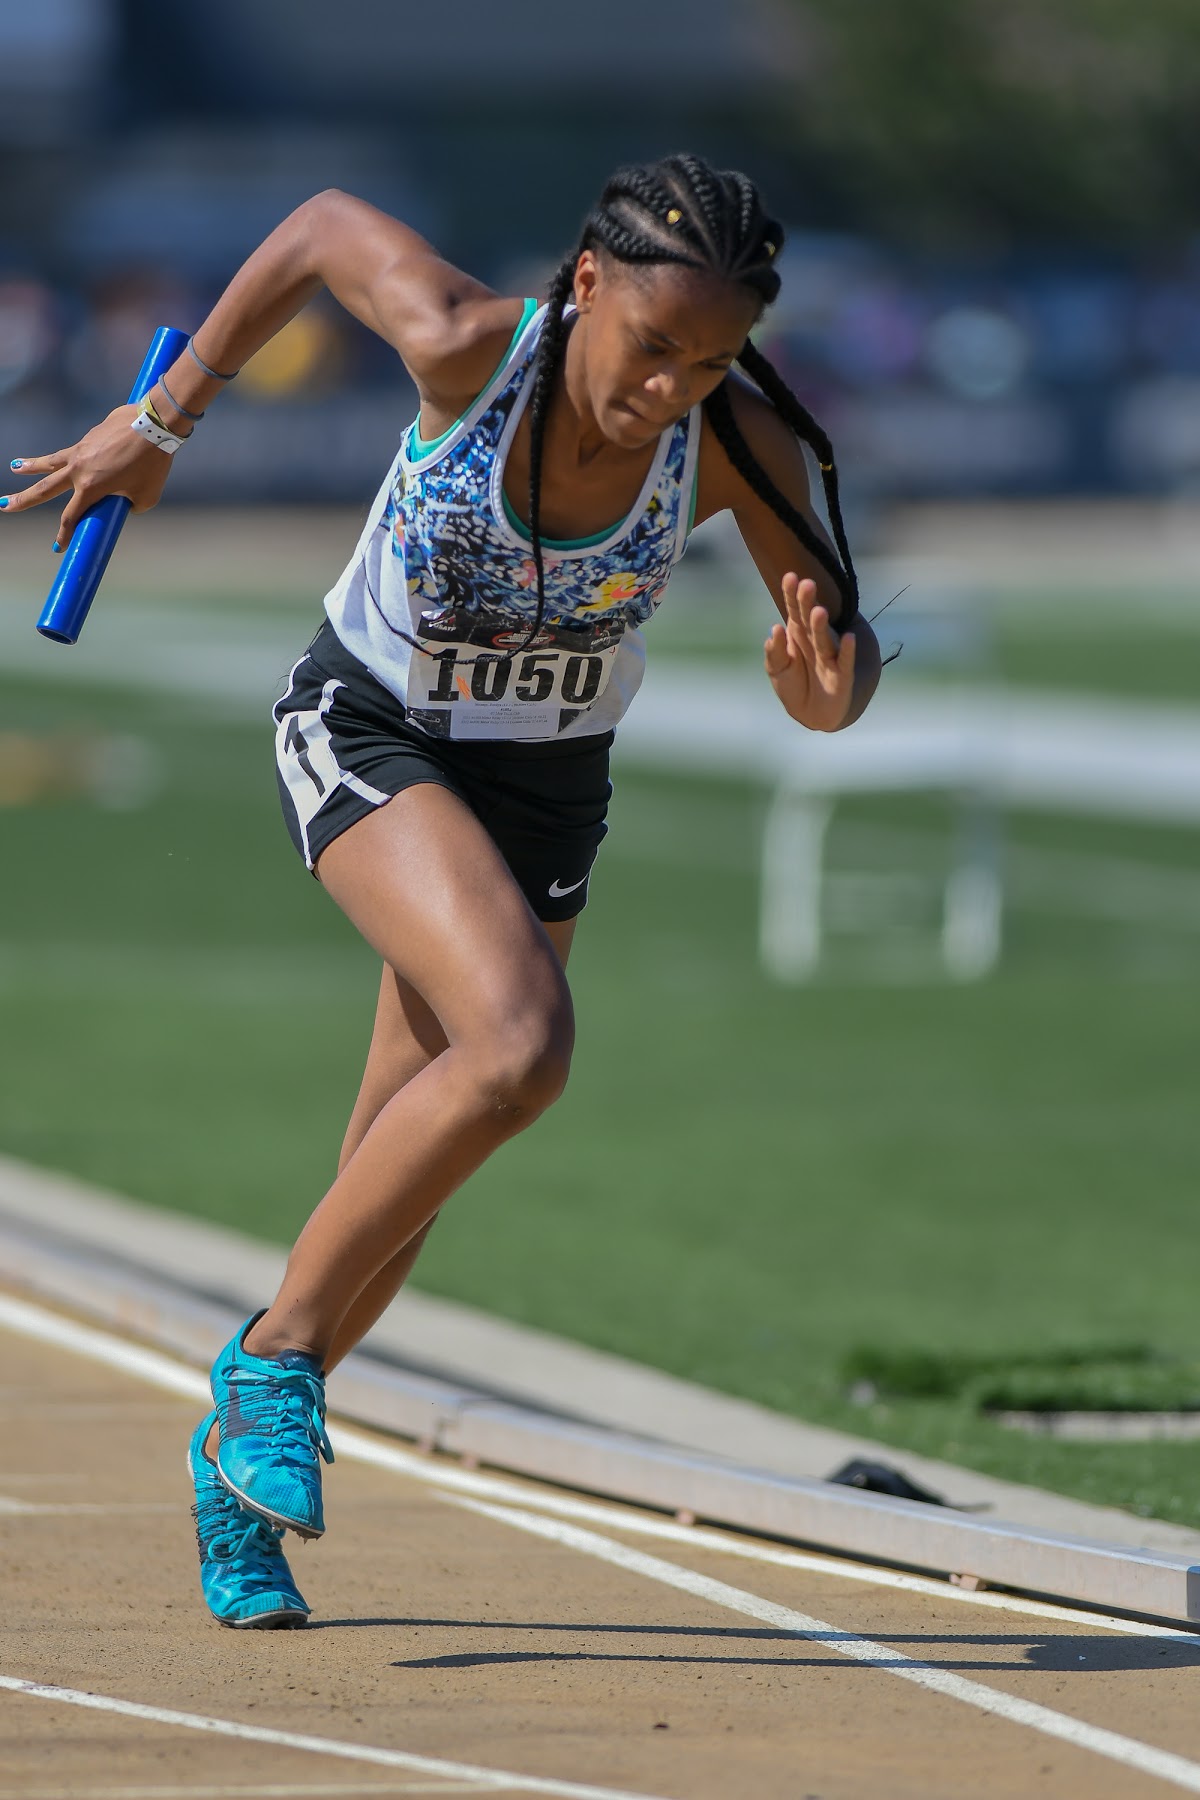 USATF National Junior Olympic Track and Field Championships Photos